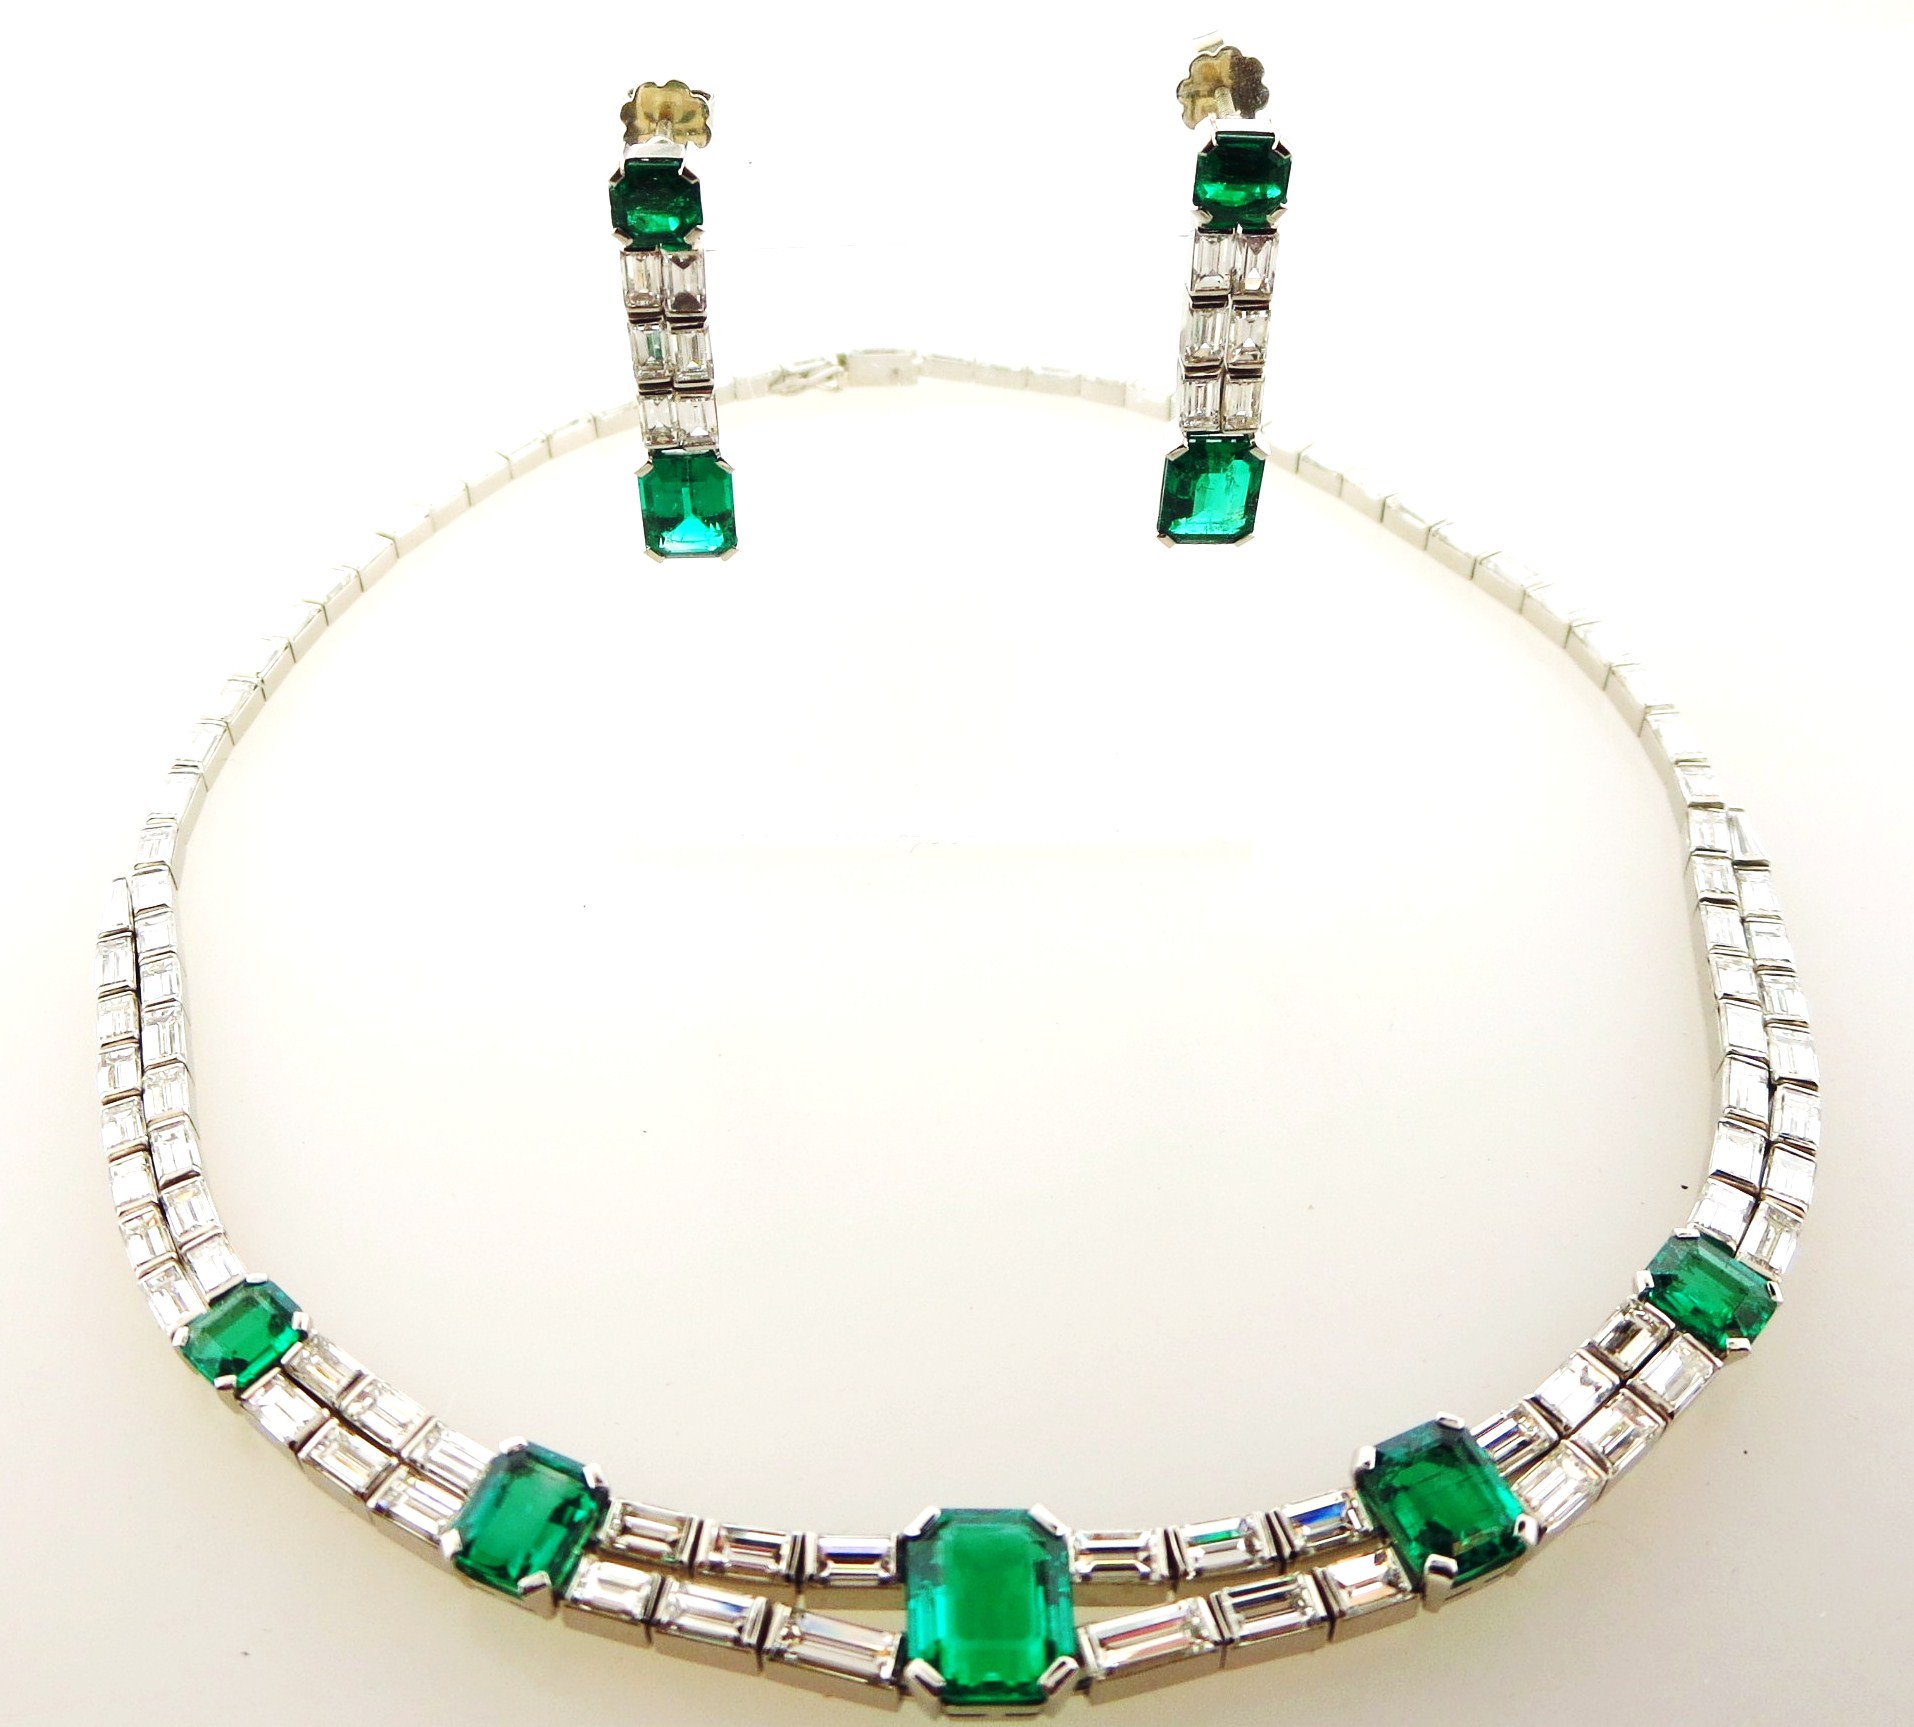 Emerald, Diamond And Platinum Necklace & Earrings. Sold For A Combined Price Of $56,250